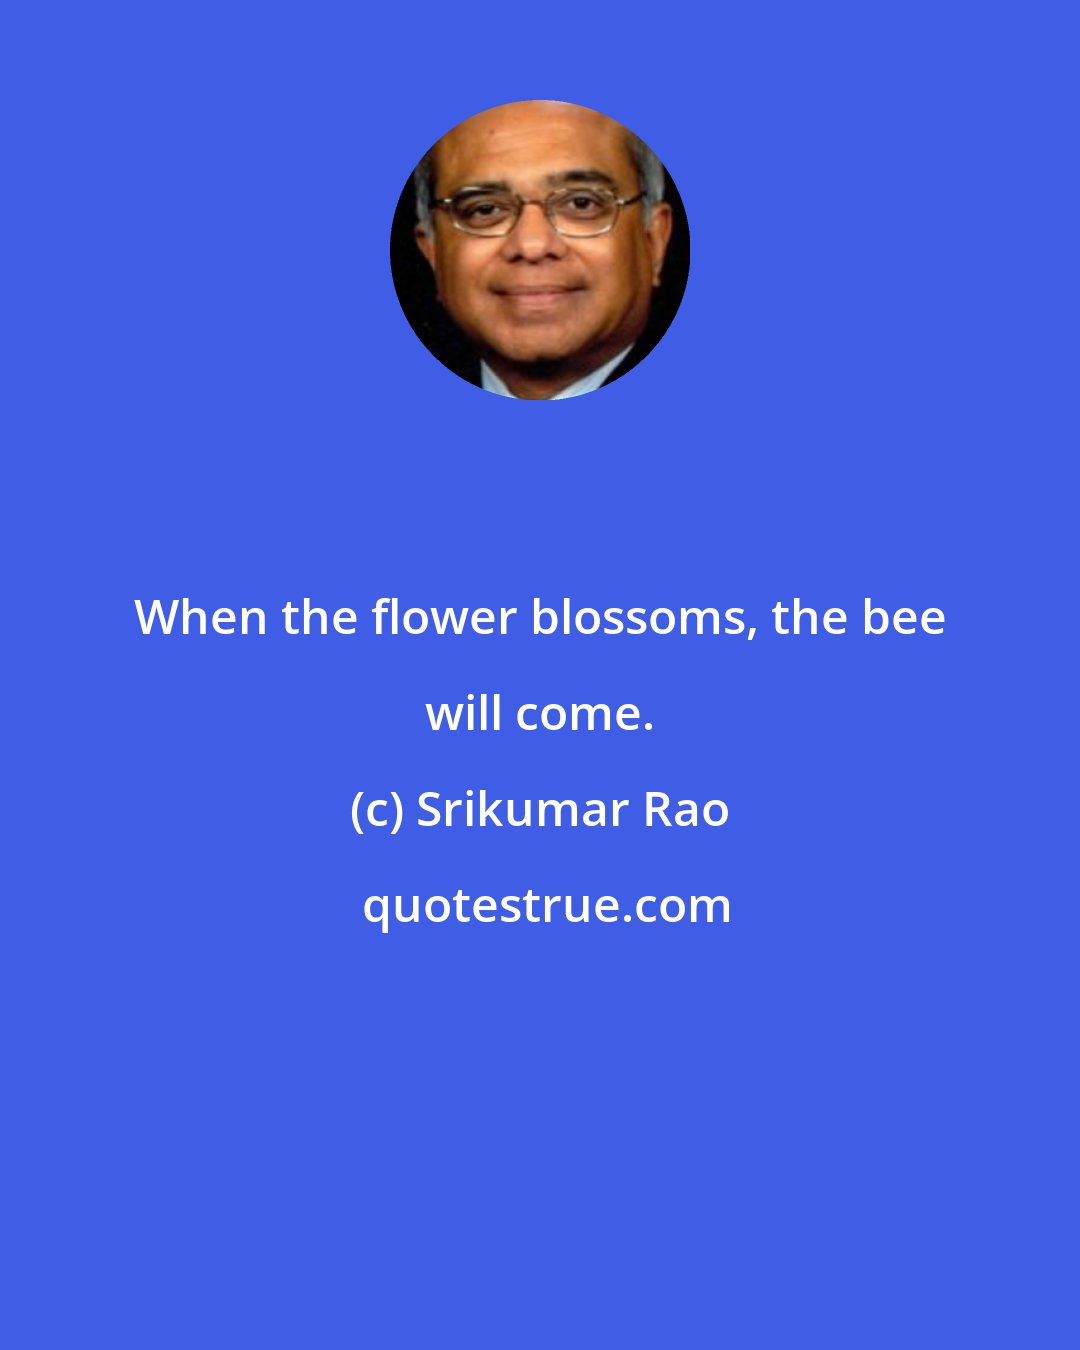 Srikumar Rao: When the flower blossoms, the bee will come.